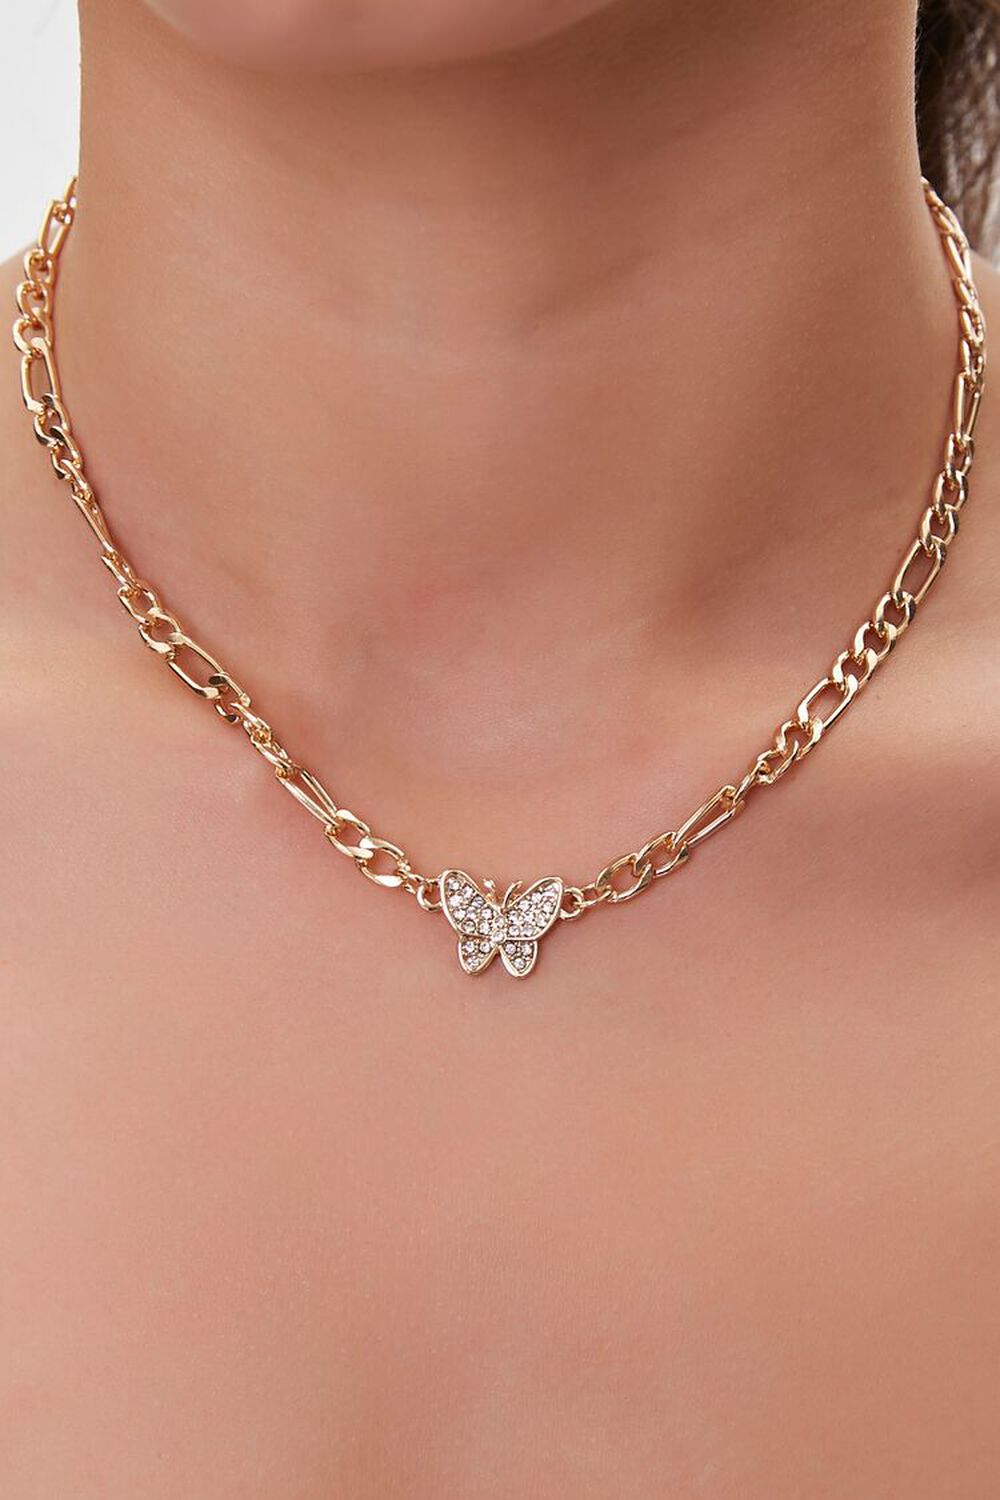 GOLD/CLEAR Butterfly Charm Necklace, image 1